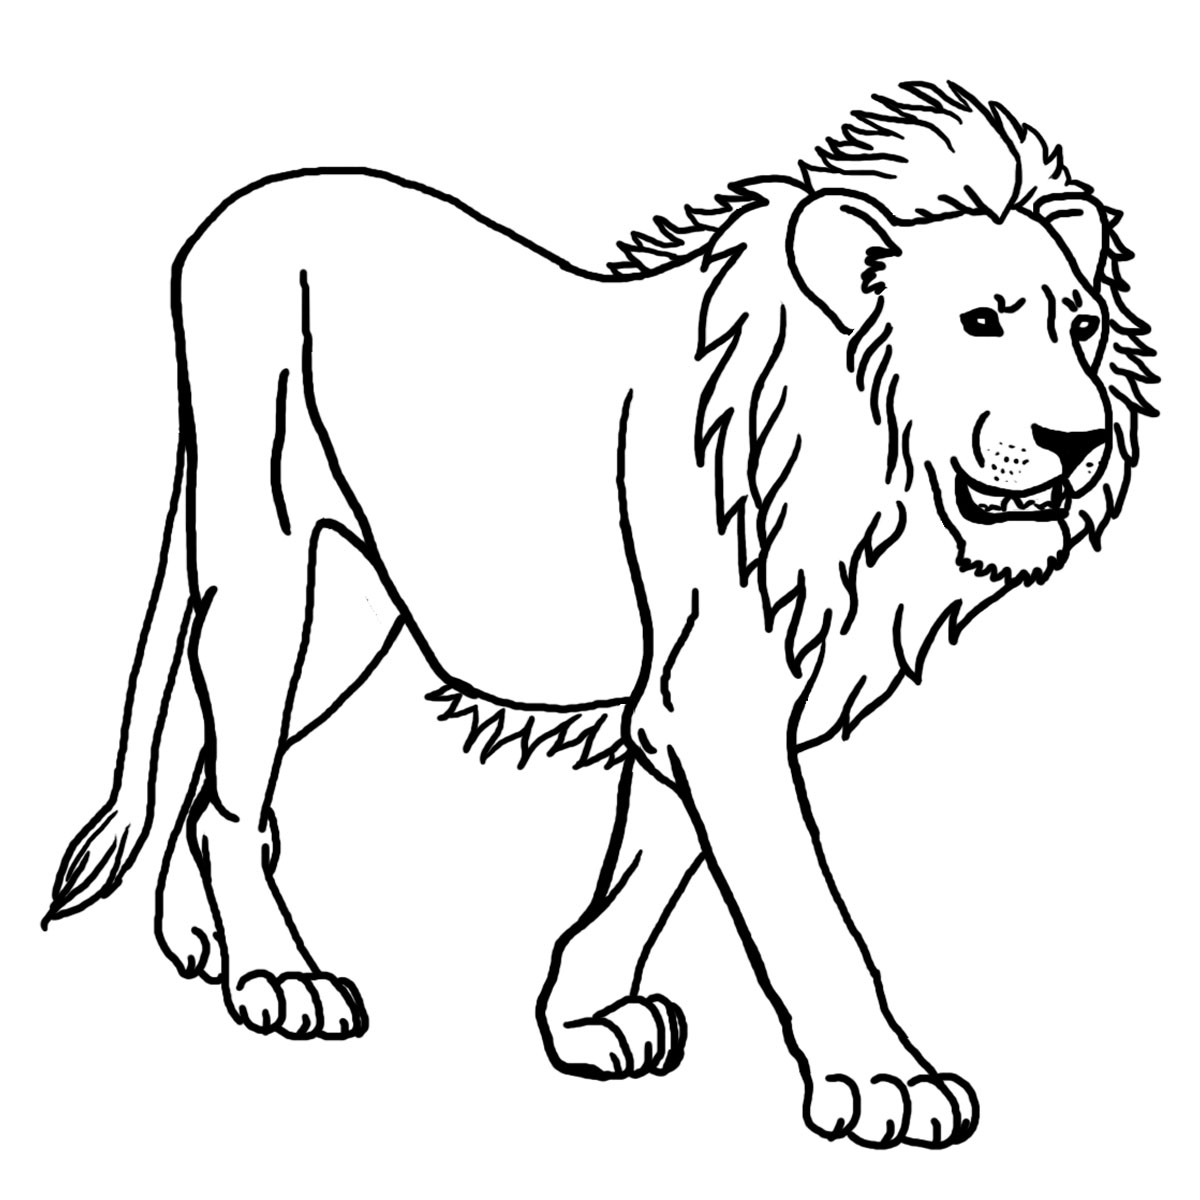 How To Draw a Lion Step By Step : Drawing and Activity Book For Kids Ages 4  and up to Learn How to Draw (Paperback) - Walmart.com